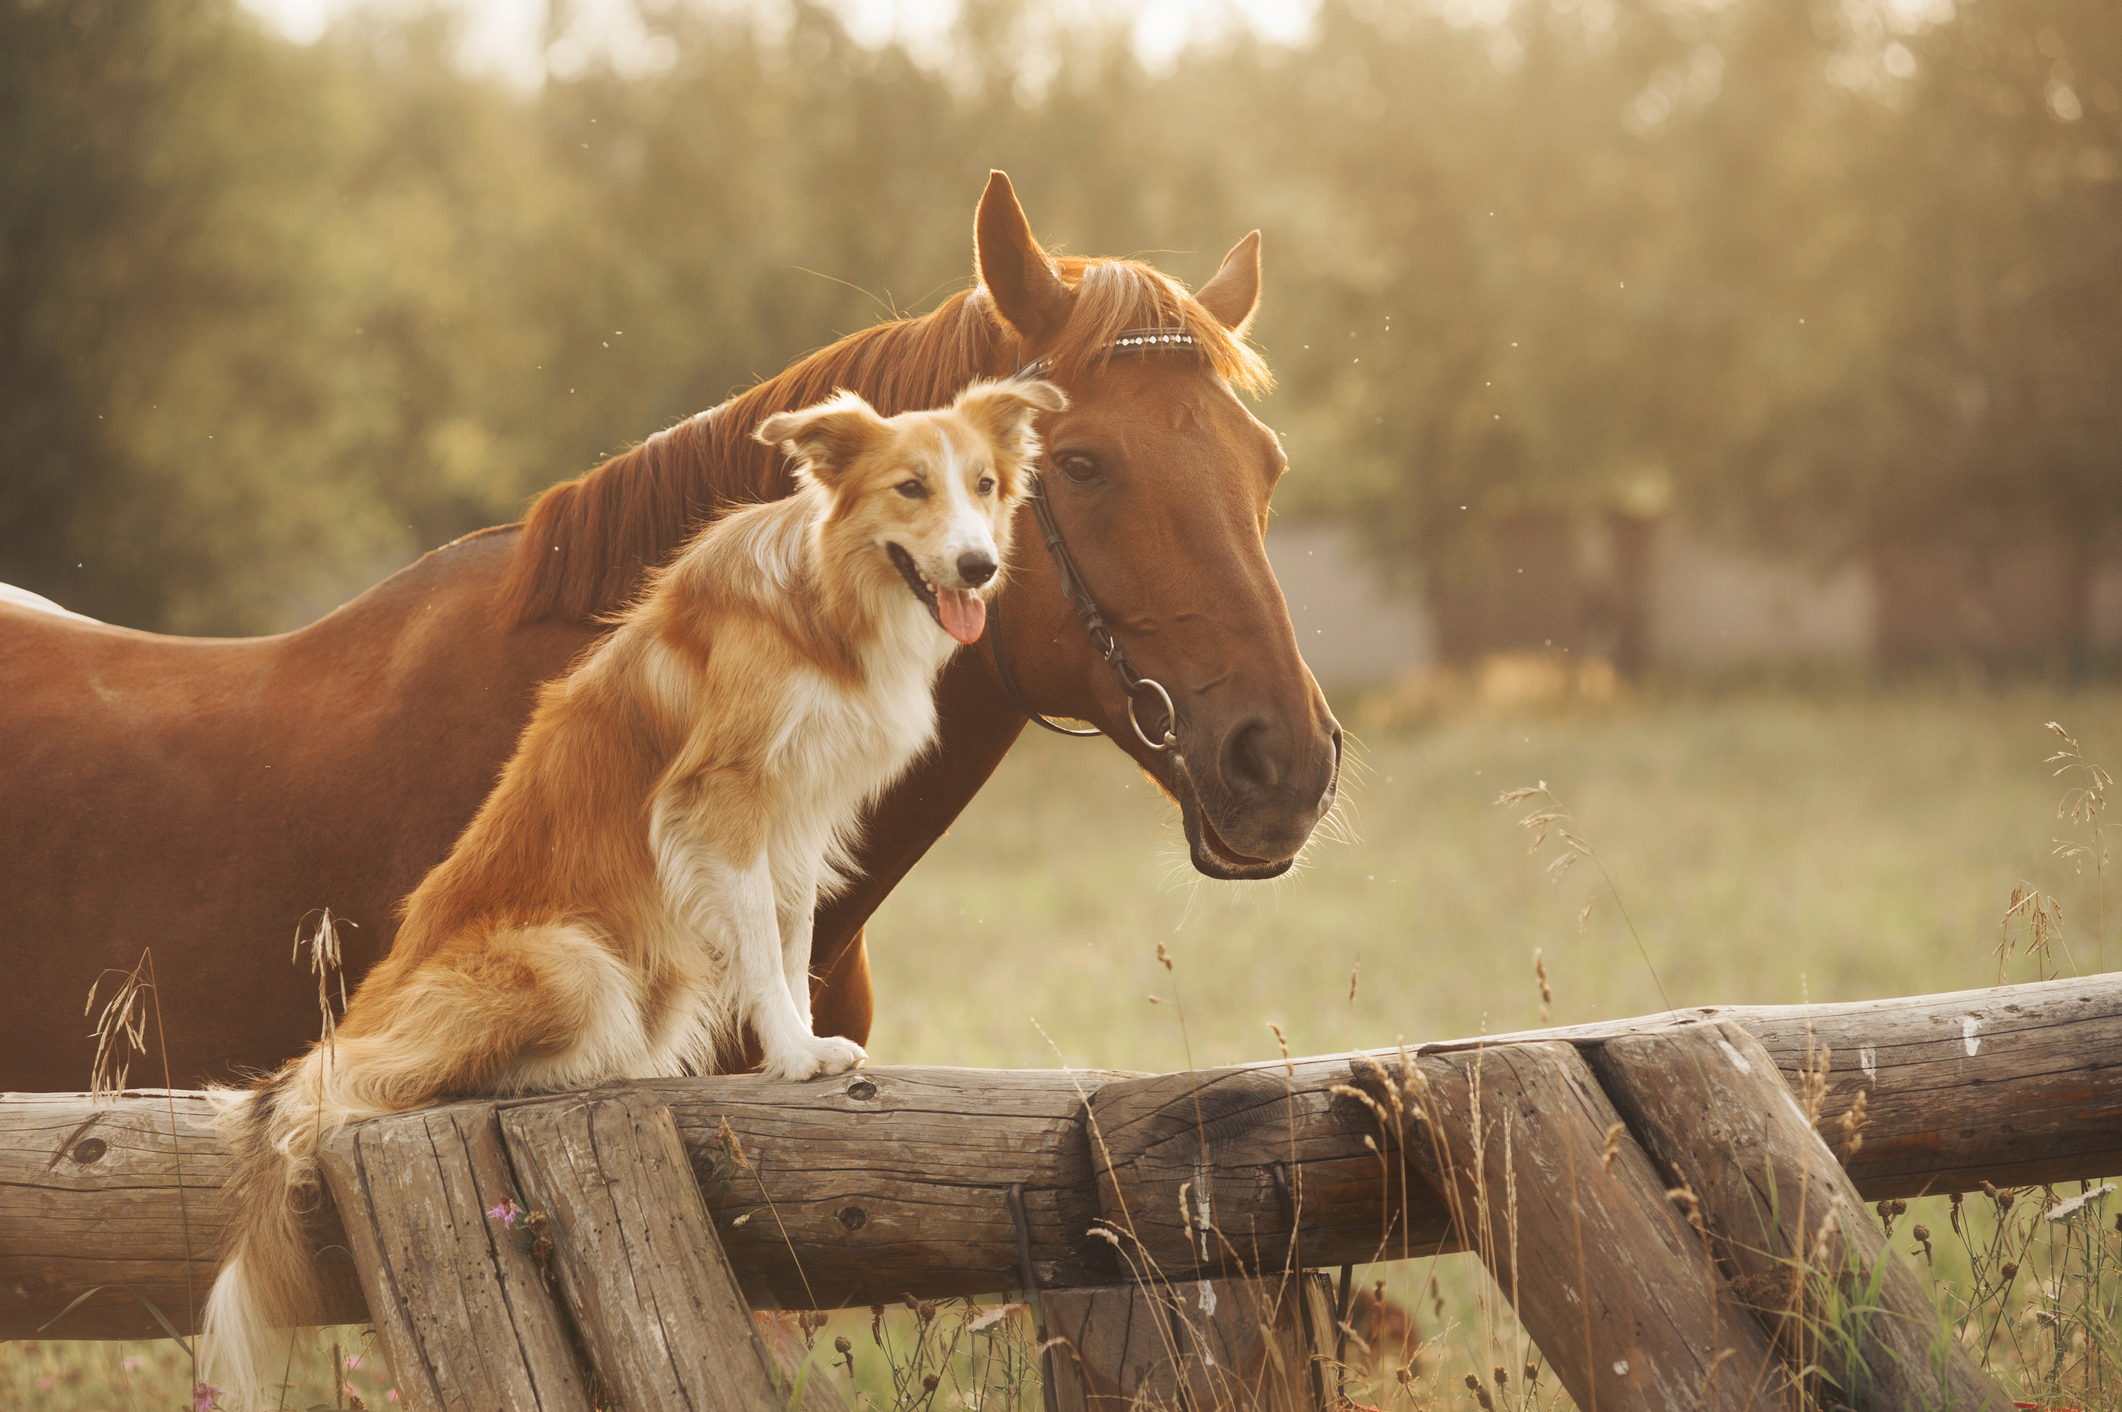 A horse looking over a wooden fence with a dog sitting next to it on the fence